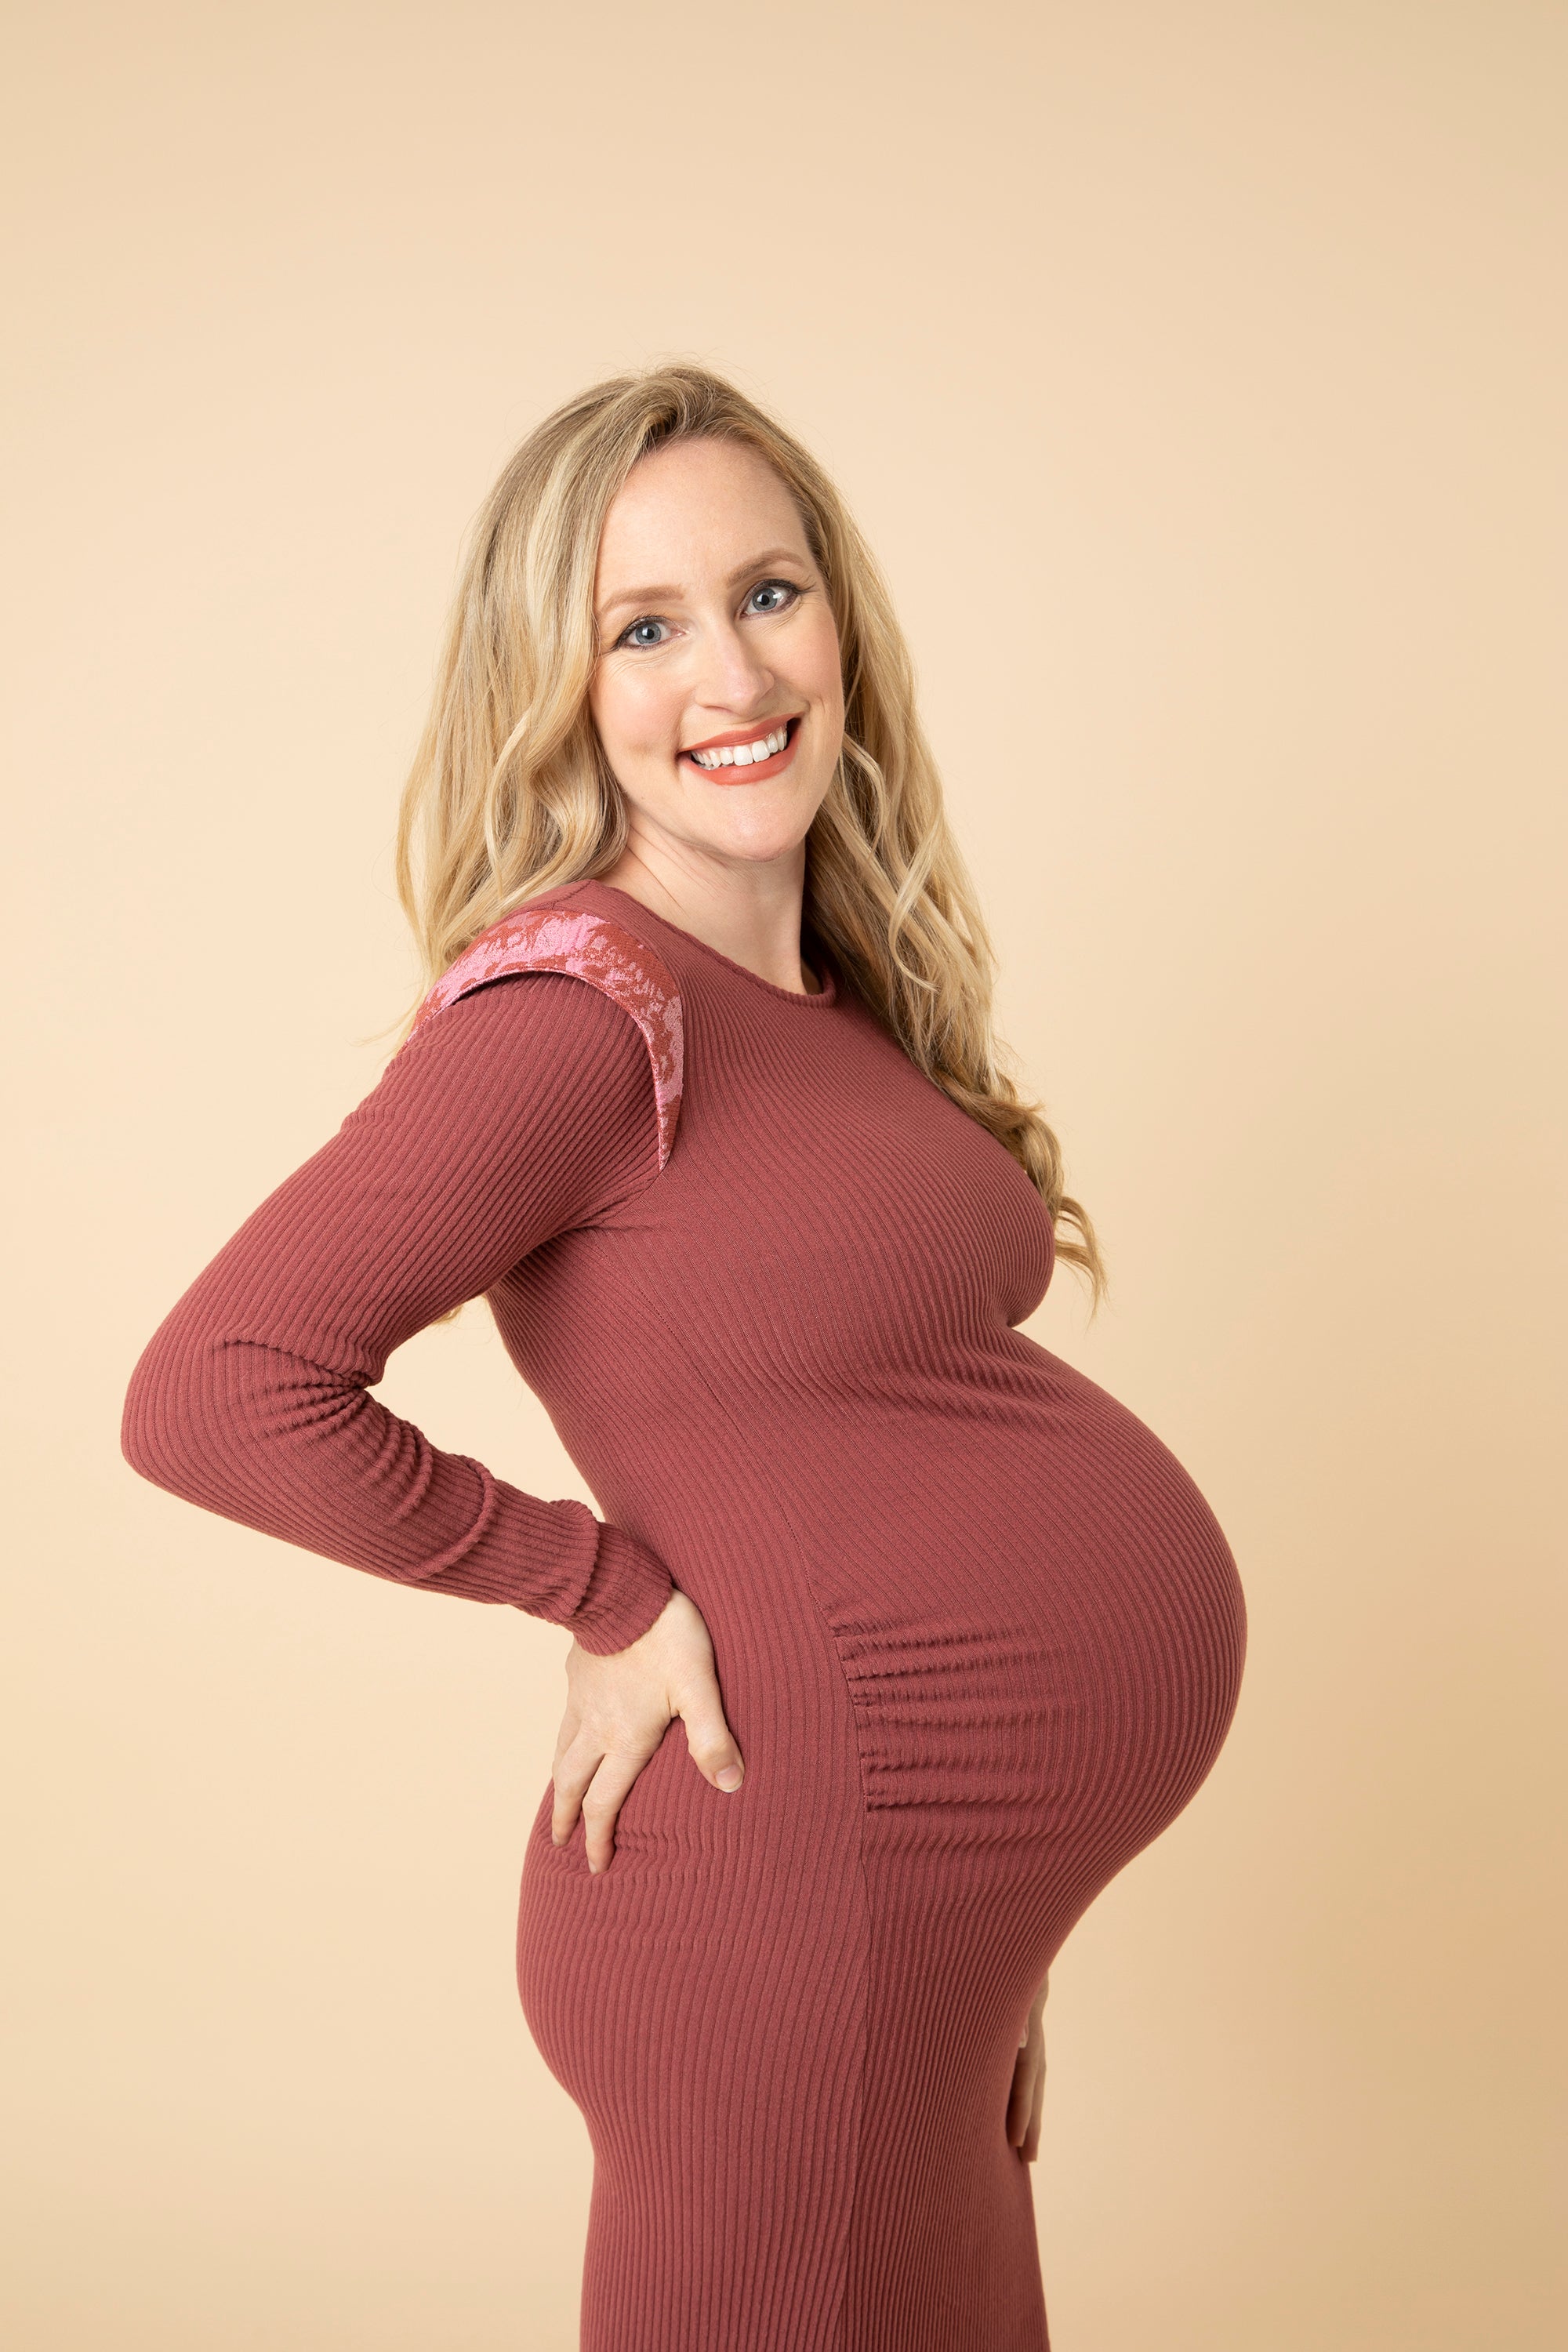 This maternity dress is a must-have for every stylish maternity wardrobe. Made in skin-soft fabric that hugs your growing curves in the right places. Discreet ruching gives the ‘perfect fit’ bump silhouette. Great occasion wear maternity dress and a perfect modern maternity office wear dress. Takes you from day to evening